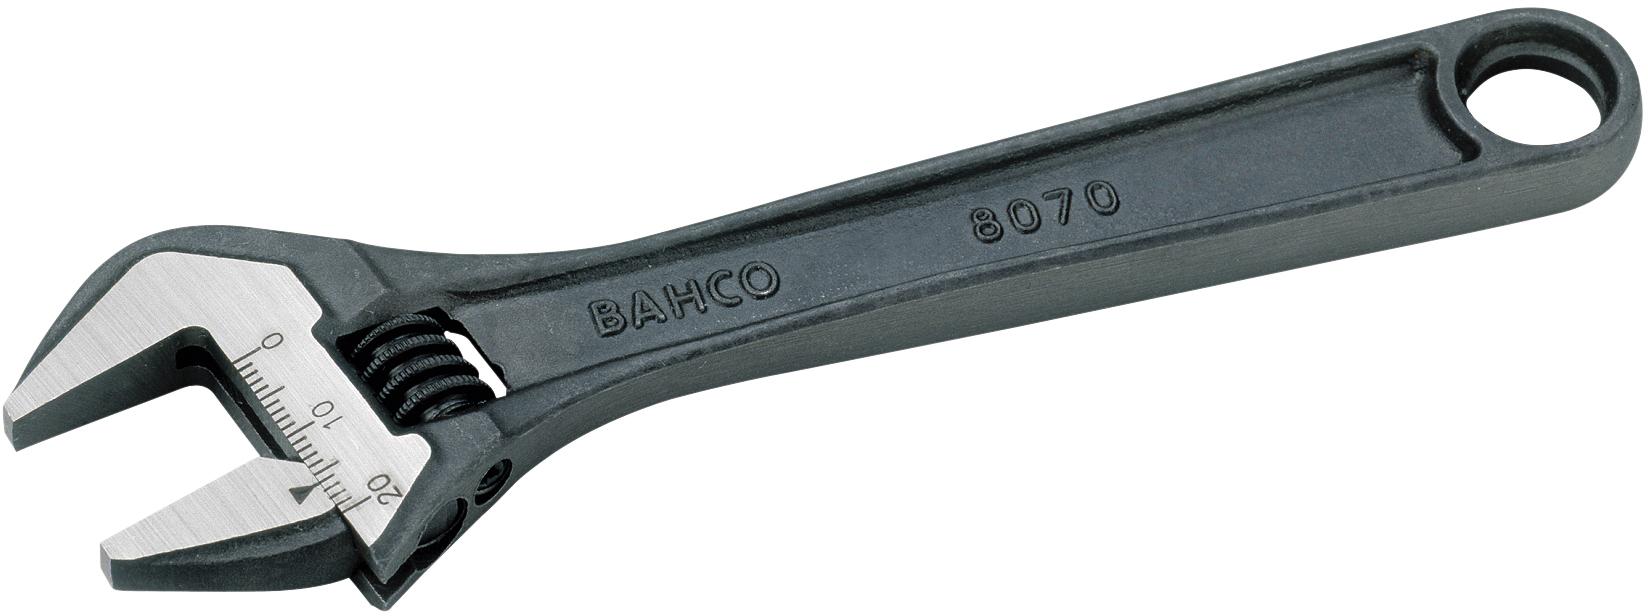 Bahco Adjustable Wrench 6 Inch 8070 20Mm